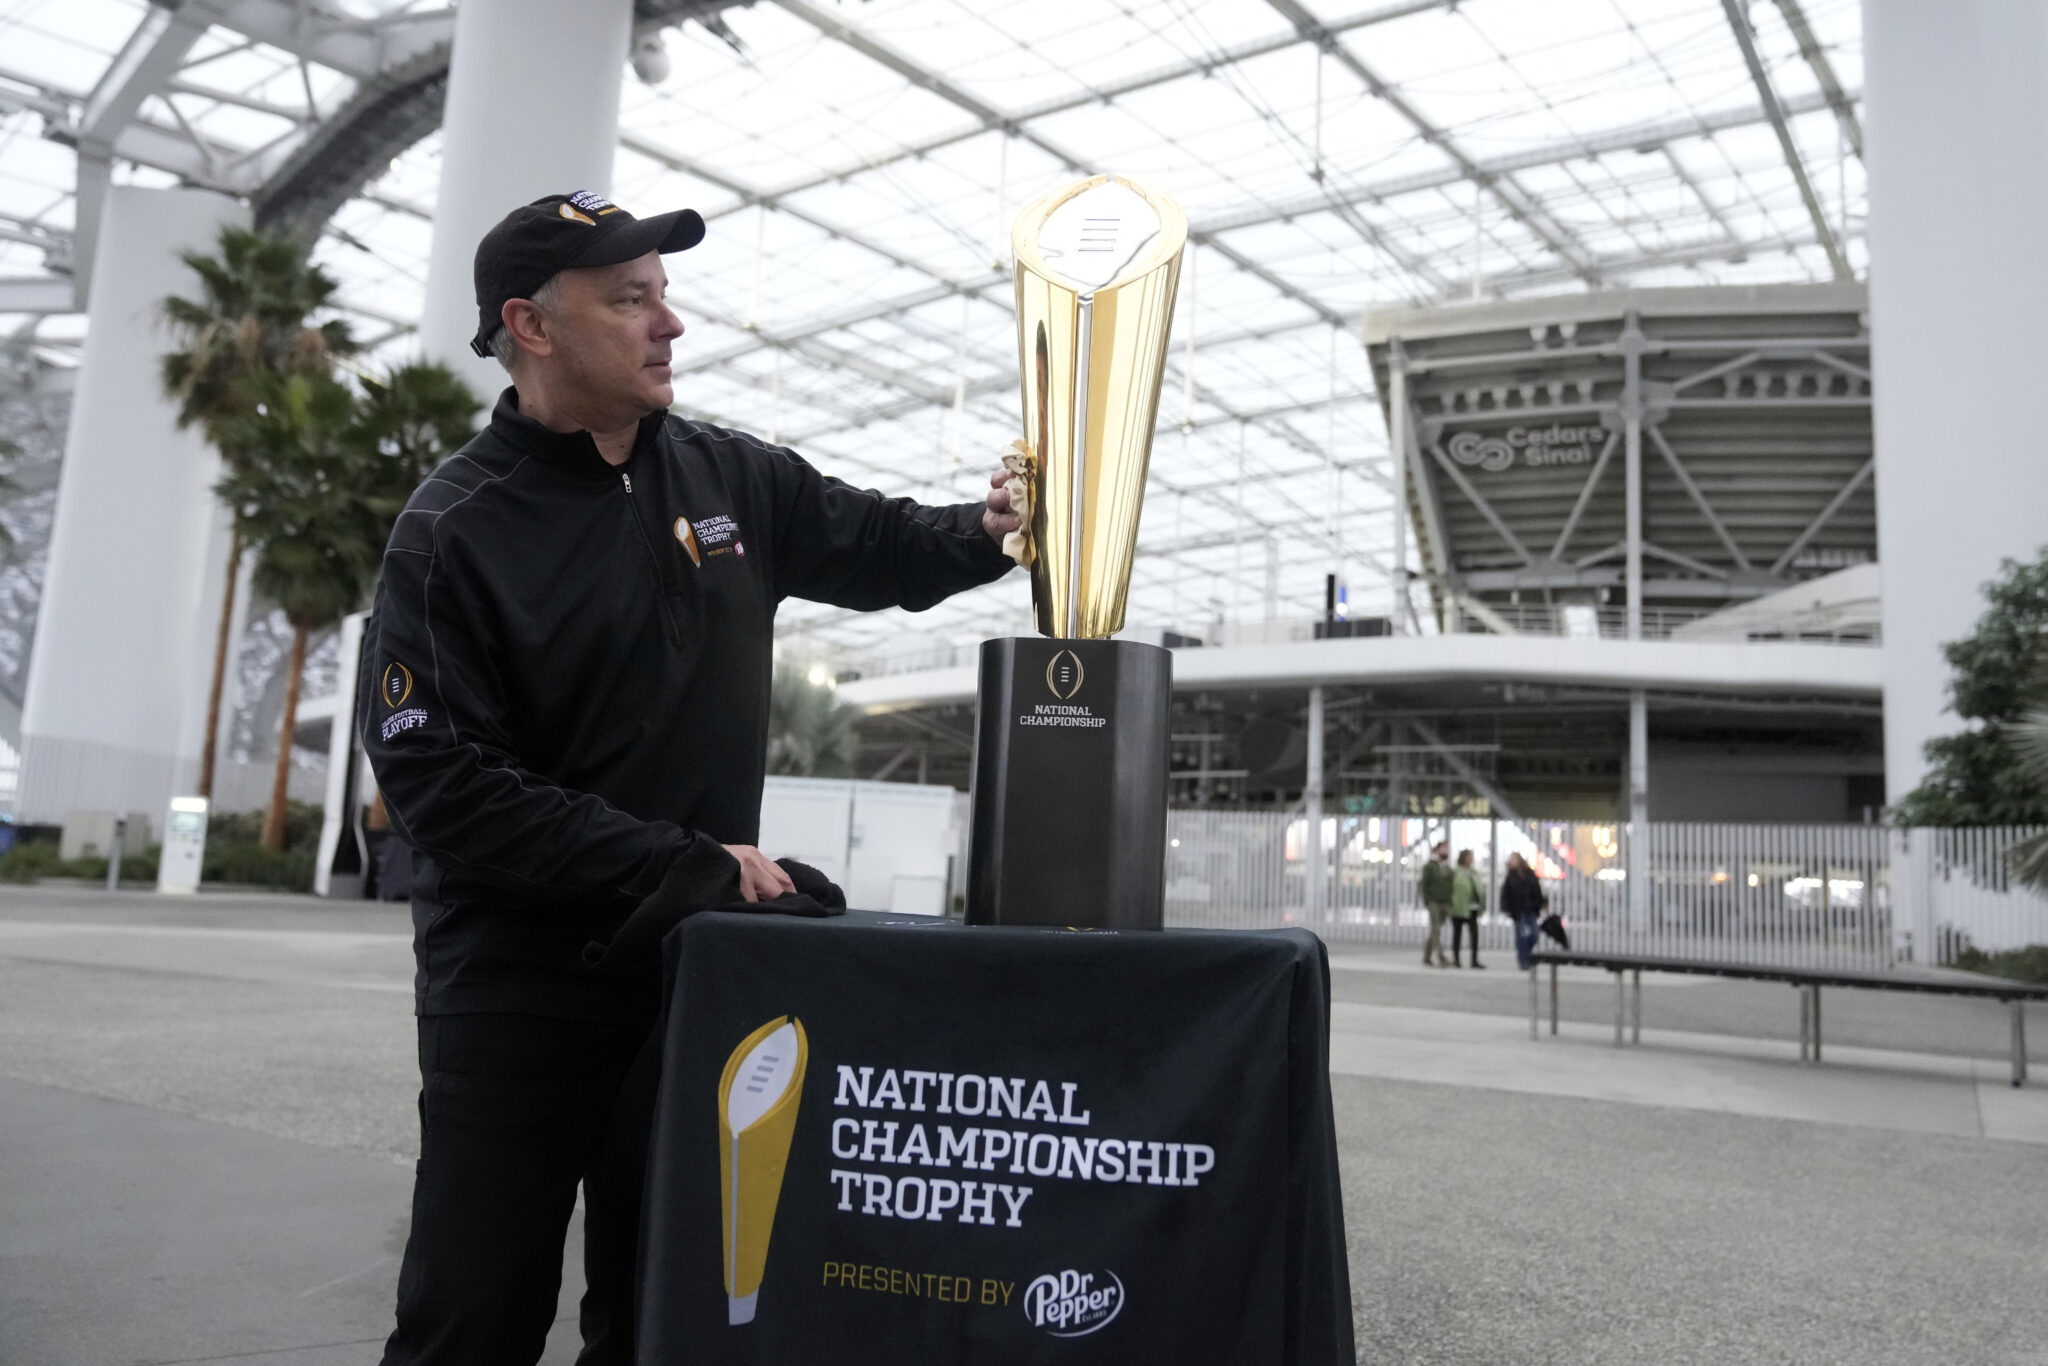 Charley Green cleans the championship trophy Wednesday, Jan. 4, 2023, before a press preview ahead of the CFP NCAA football national championship game at SoFi Stadium in Inglewood, Calif. Georgia faces TCU on Monday for the title. (AP Photo/Marcio Jose Sanchez)